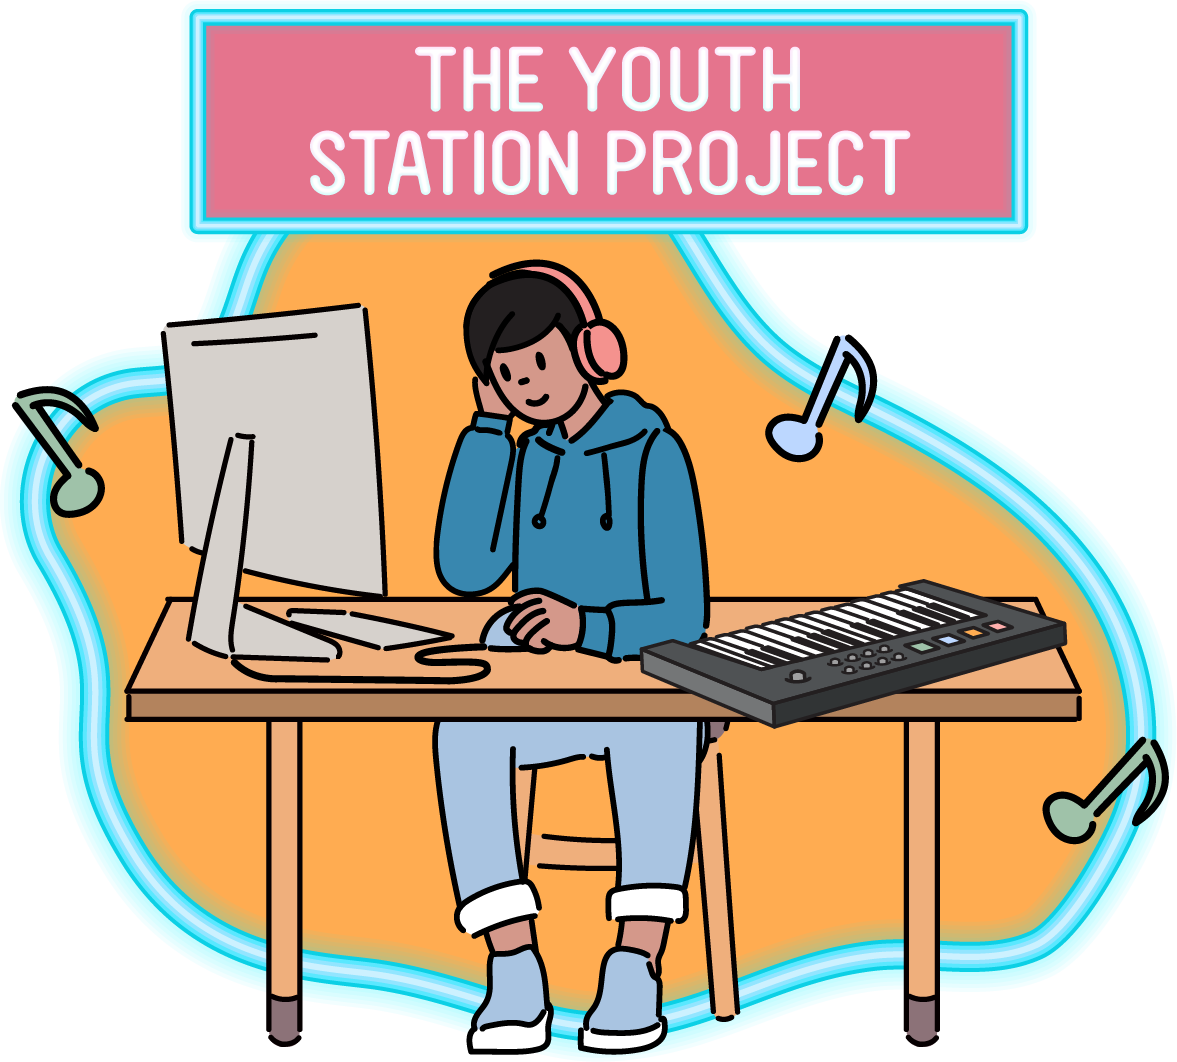 Character_TheYouthStationProject.png